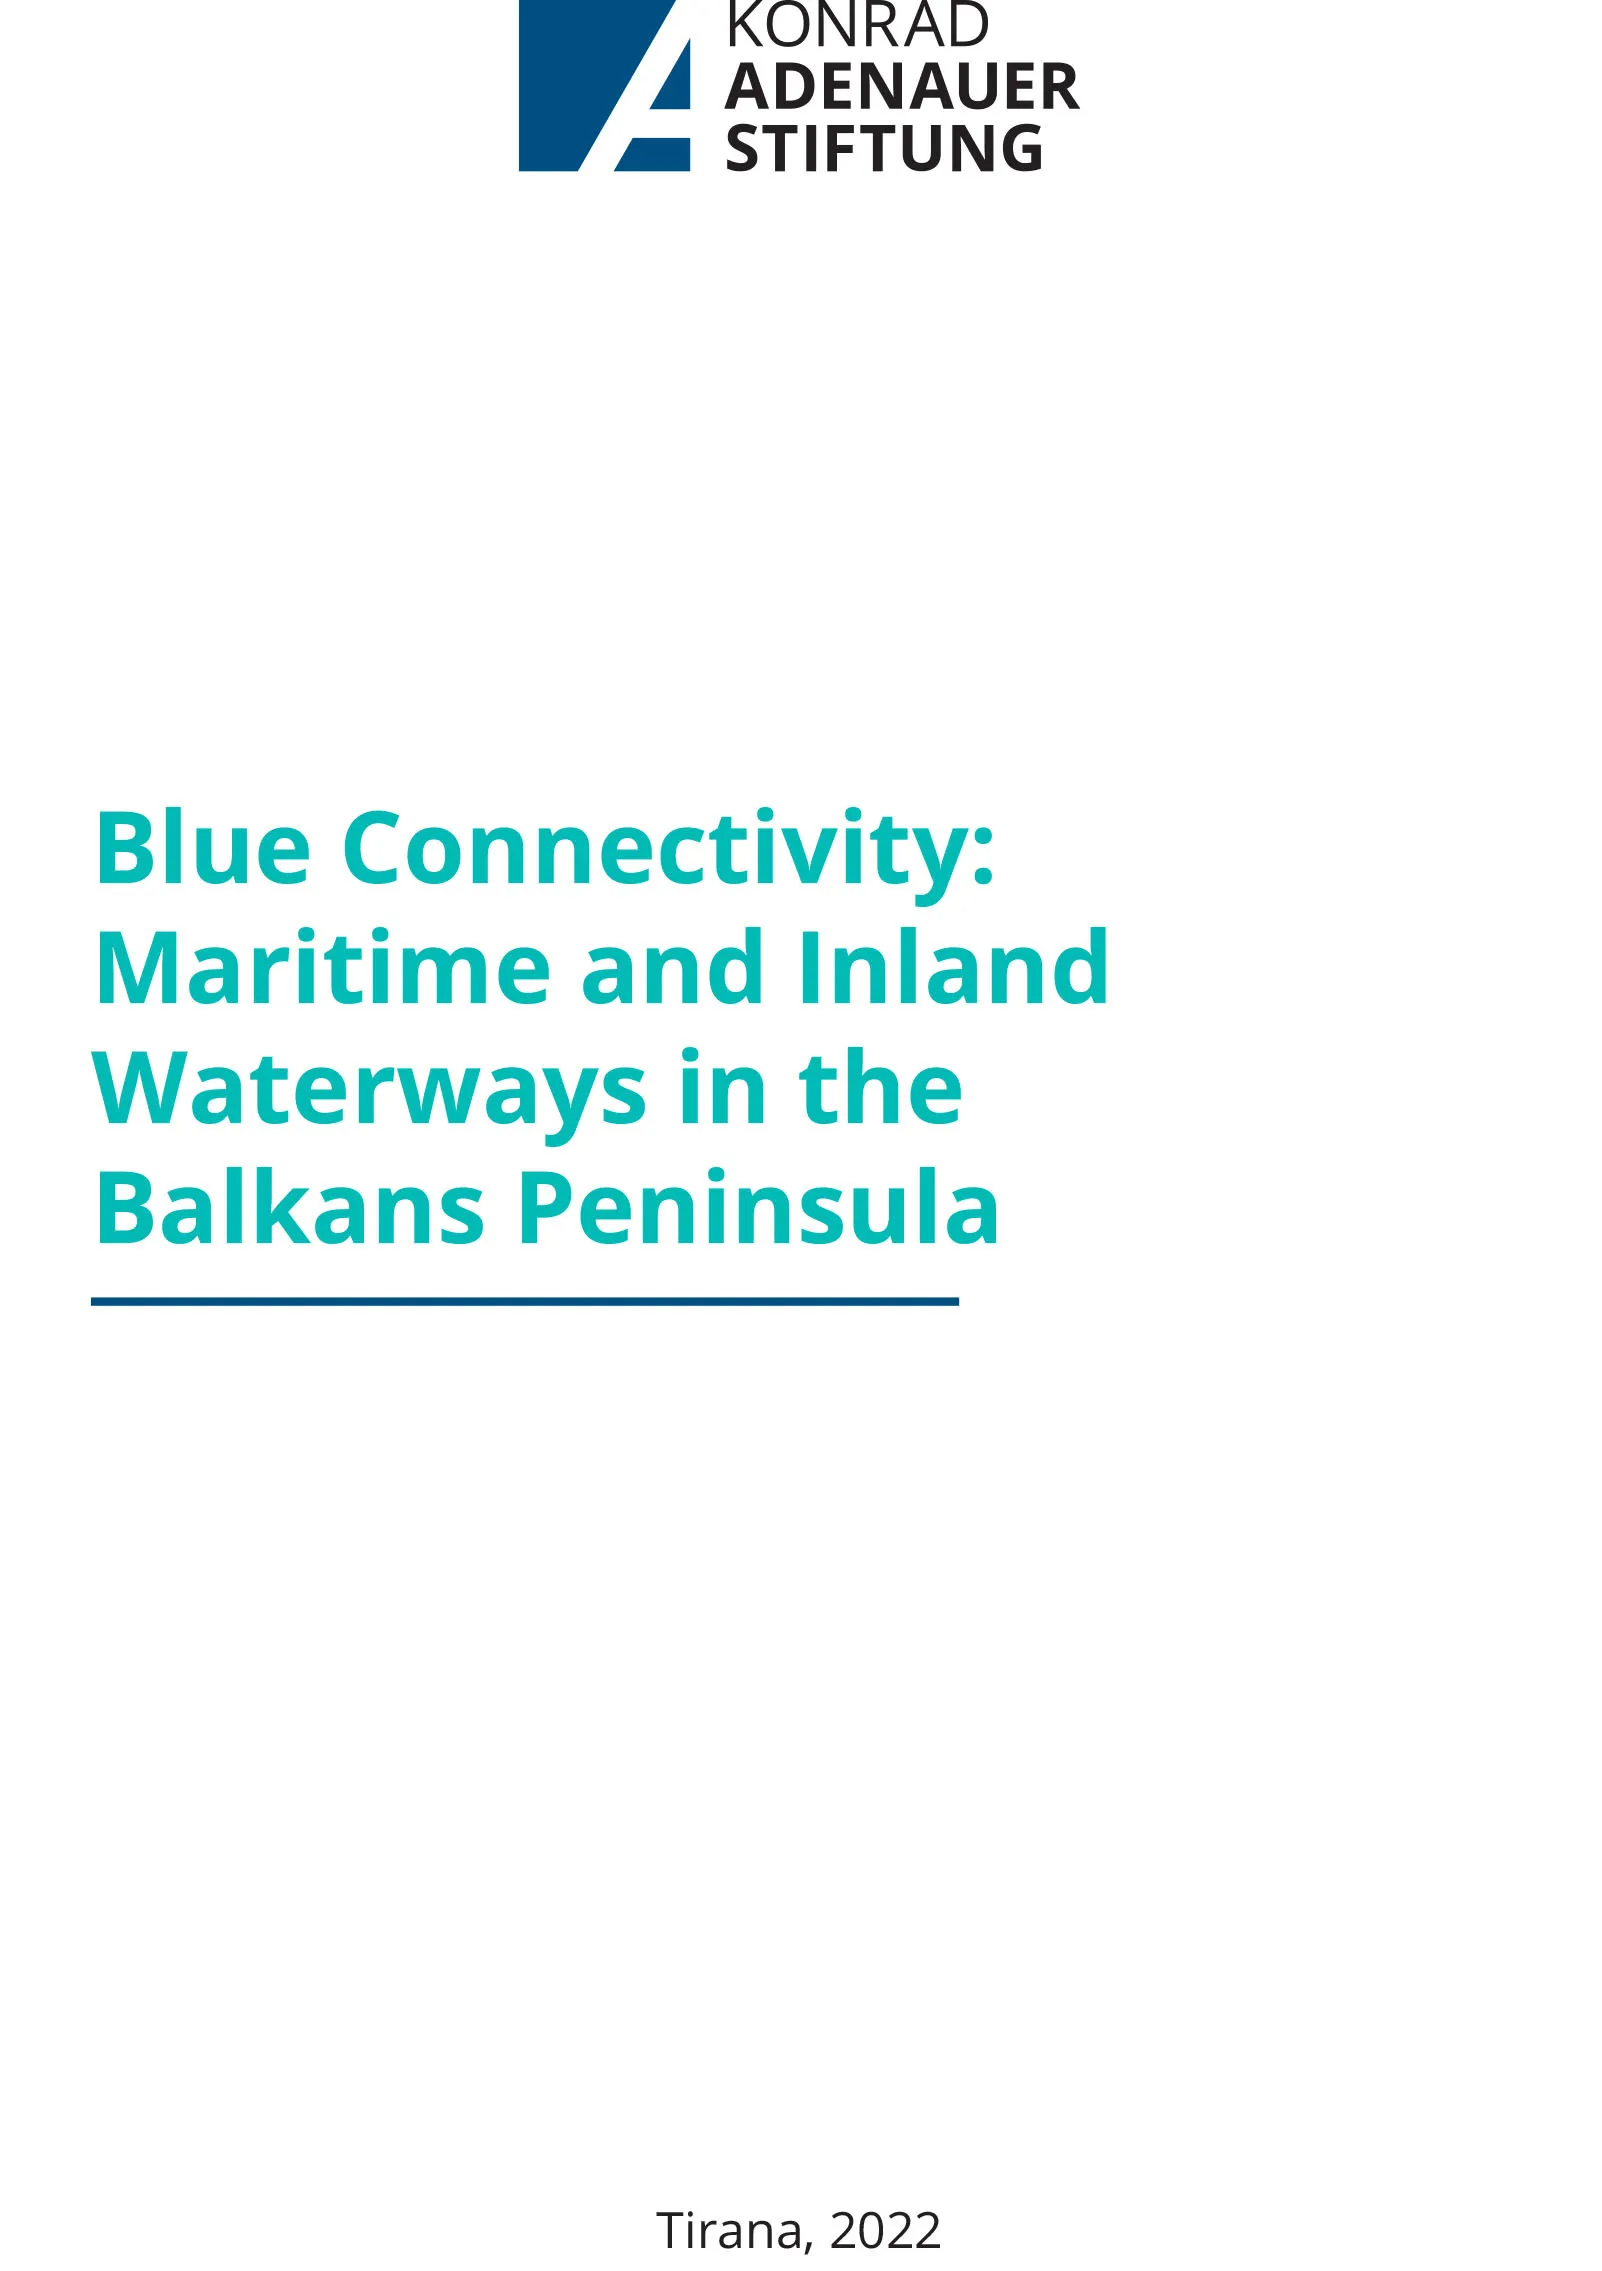 Blue Connectivity: Maritime and Inland Waterways in the Balkans Peninsula